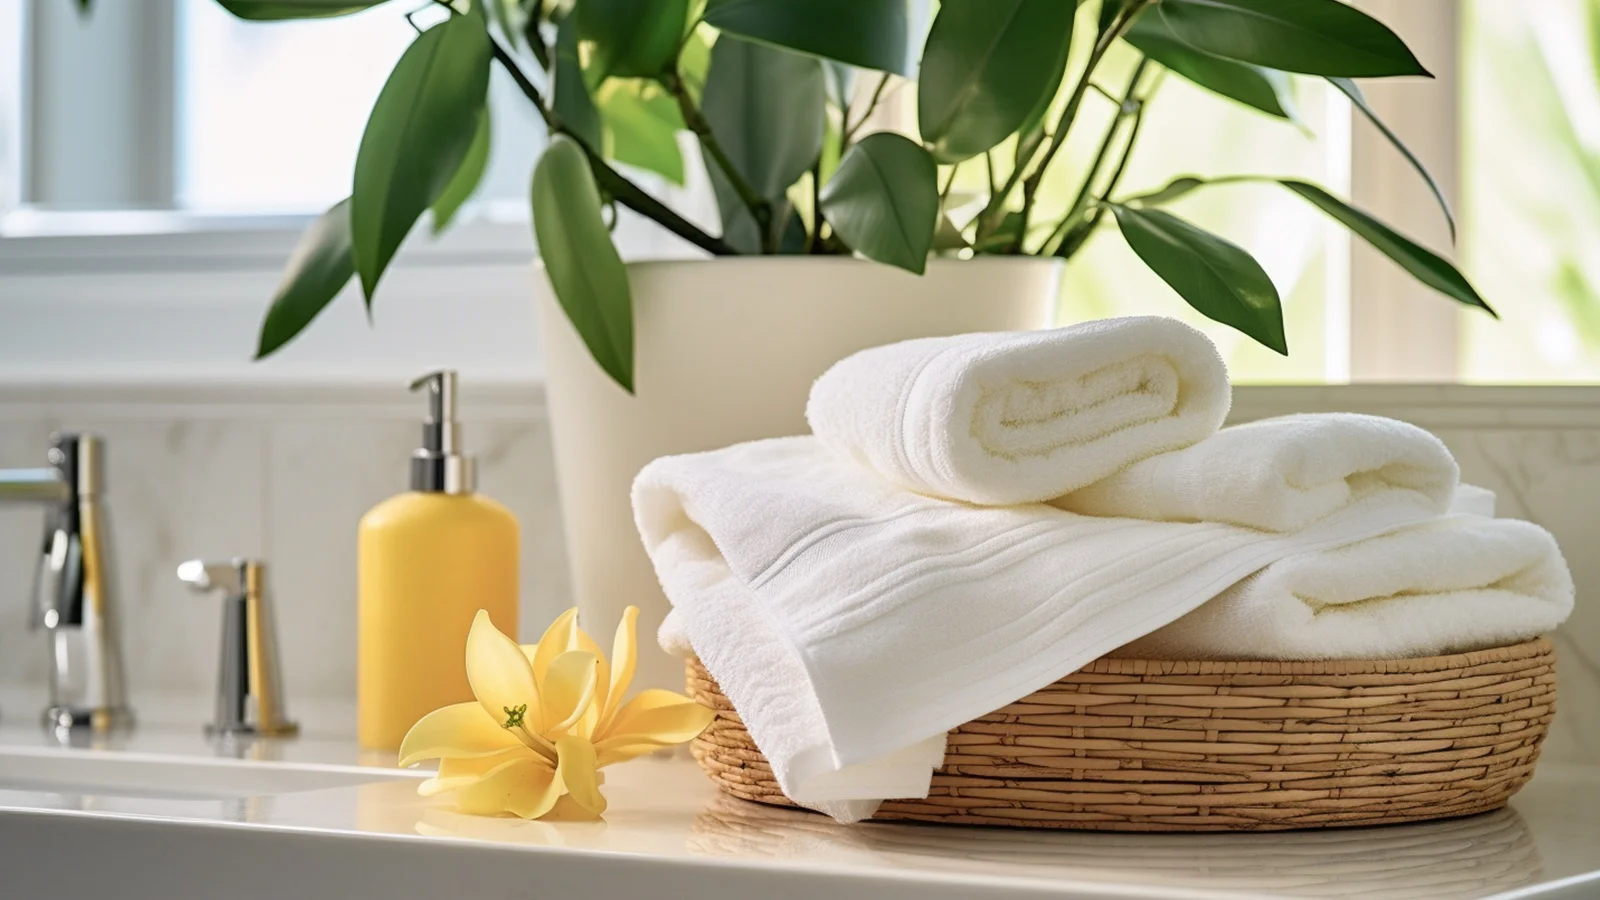 Small bathroom counter decorating ideas: a wicker basket filled with towels and a plant.